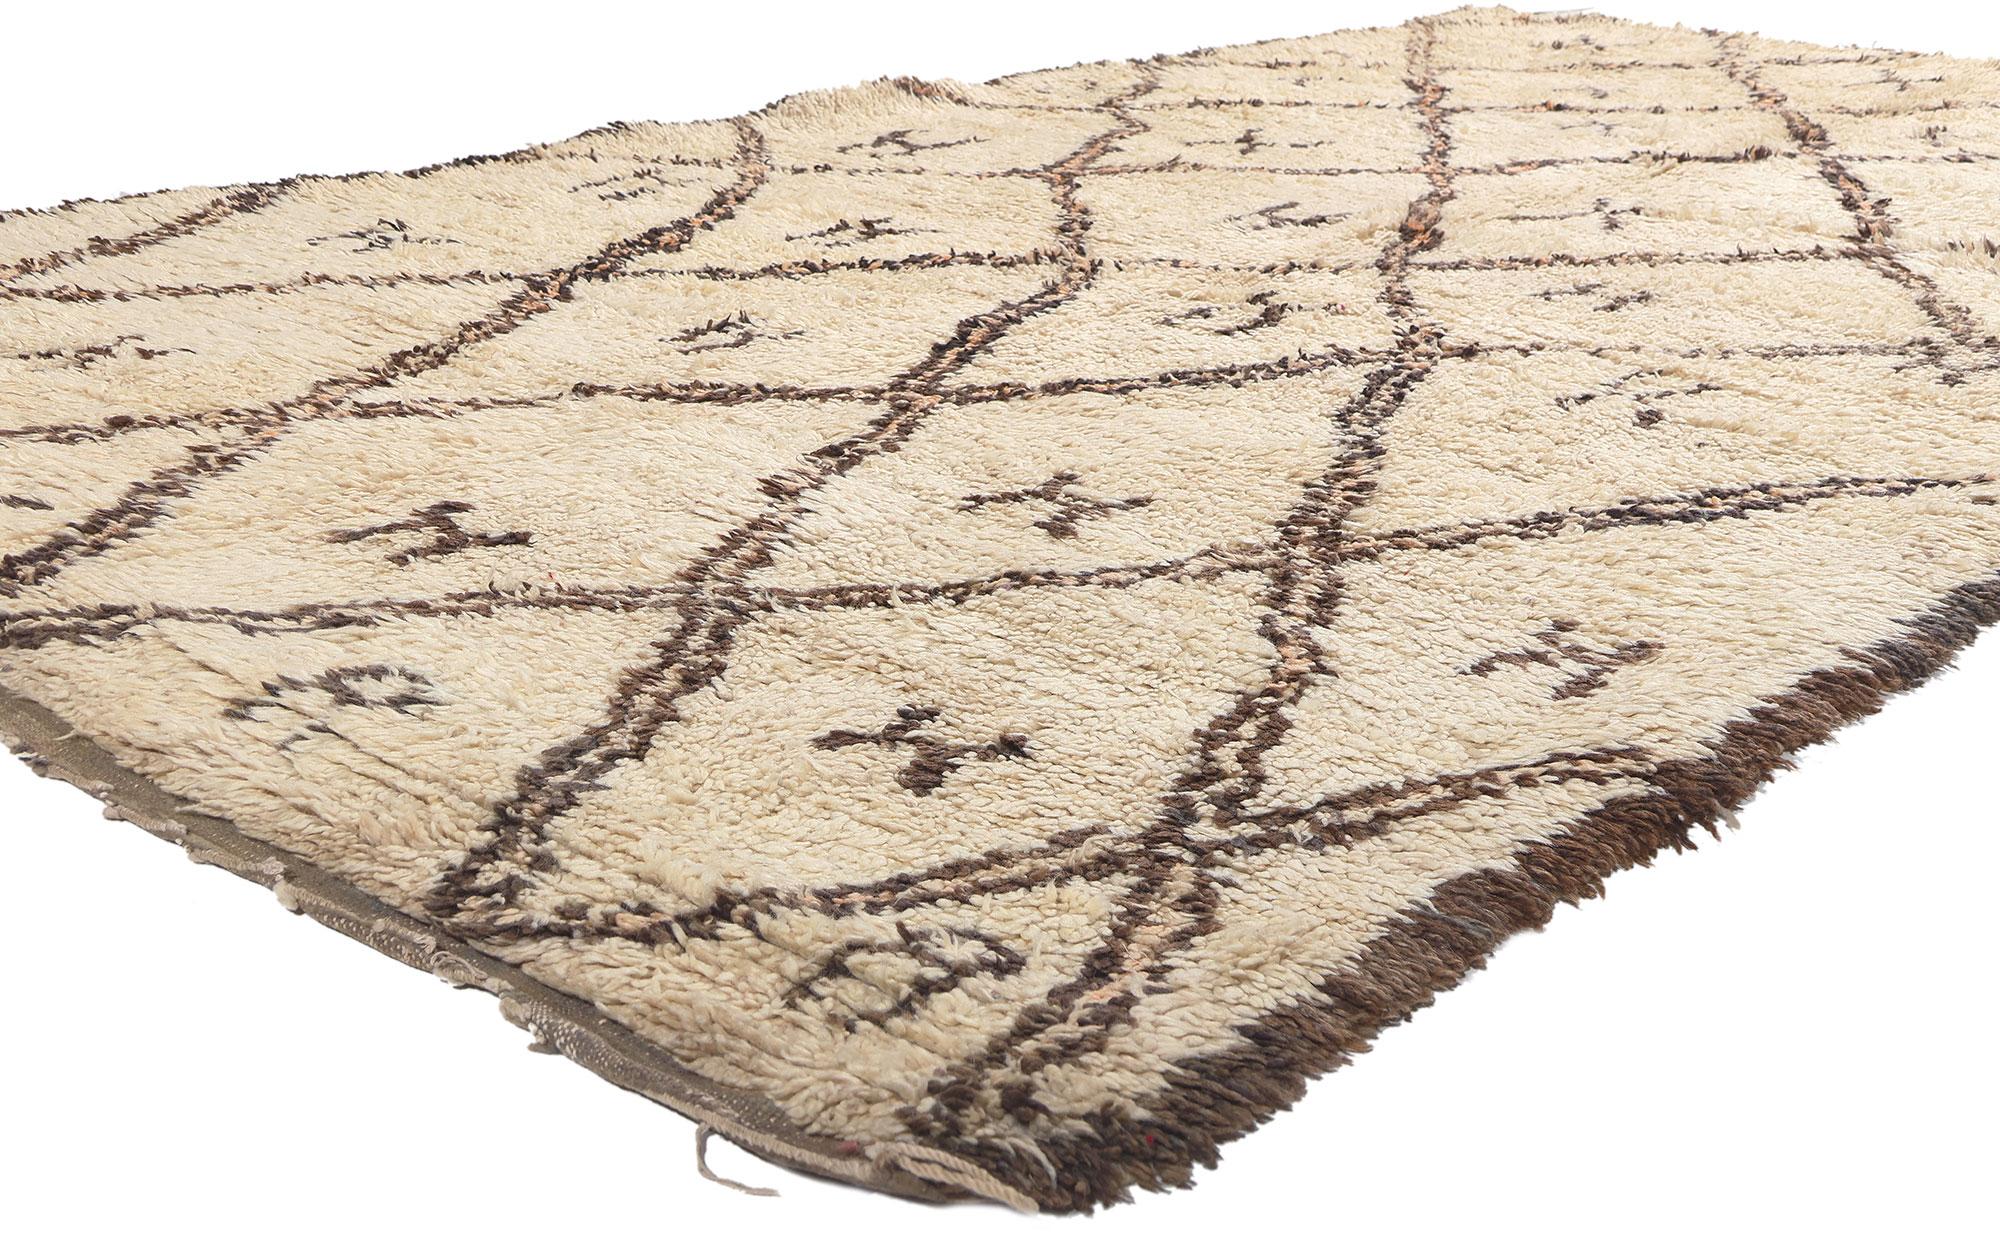 20656 Vintage Moroccan Beni Ourain Rug, 06'00 x 11'09. Originating from the Beni Ourain tribe, an integral part of the broader Berber ethnic group in Morocco, these Moroccan rugs are meticulously crafted using natural, undyed sheep's wool with a